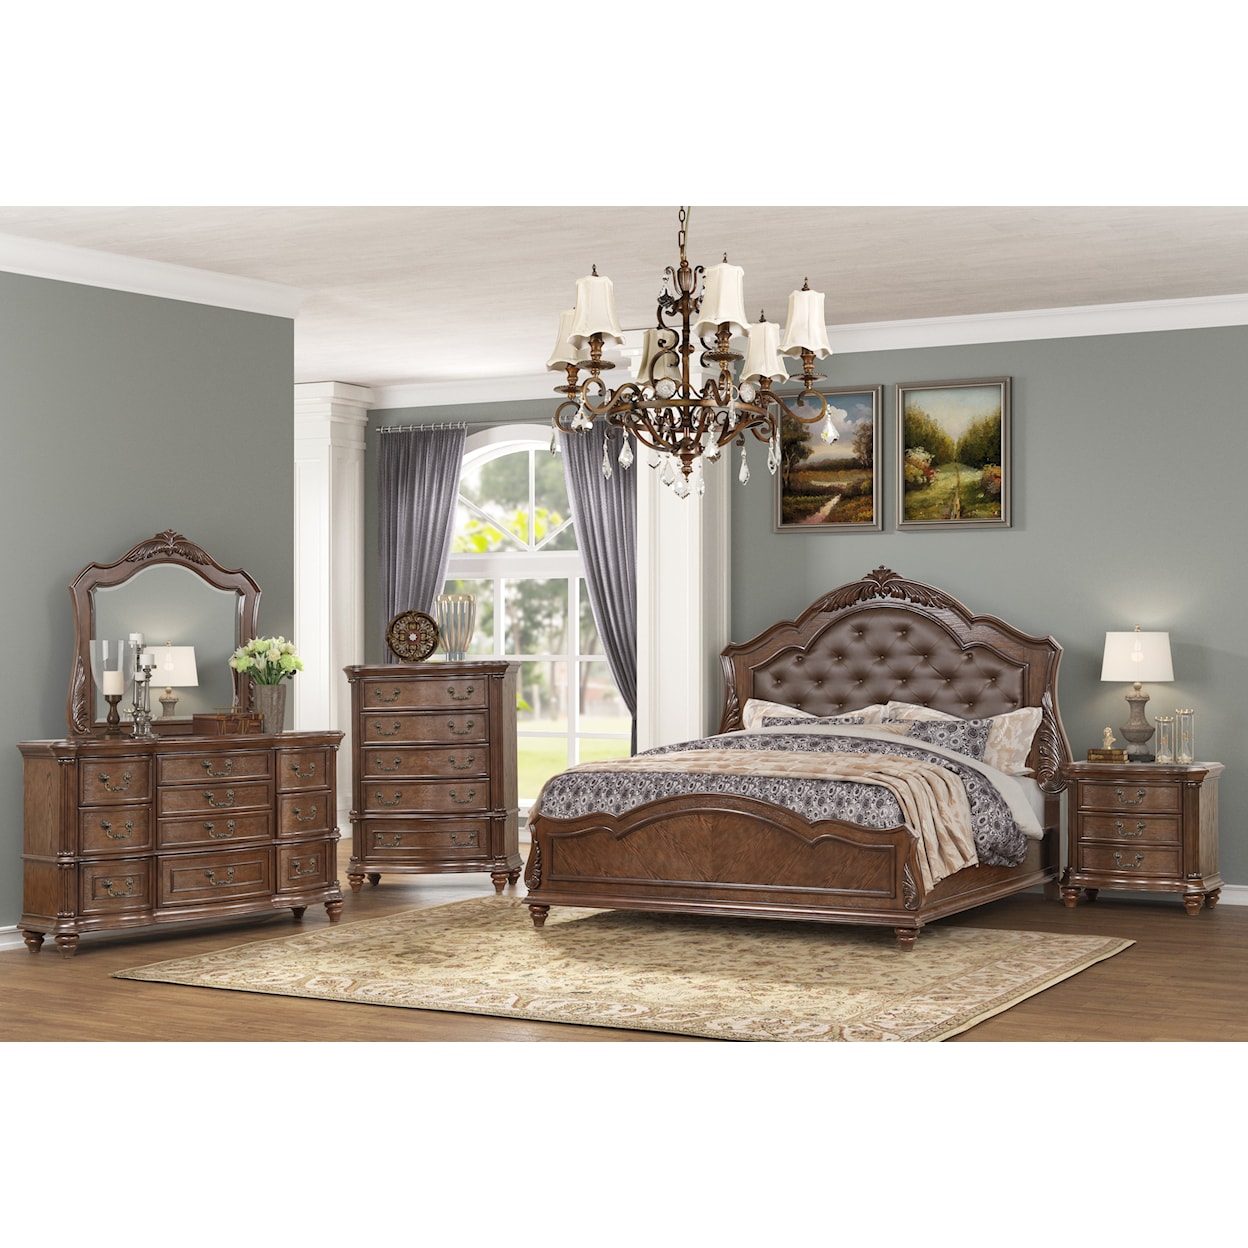 New Classic Roma Queen Bedroom Group